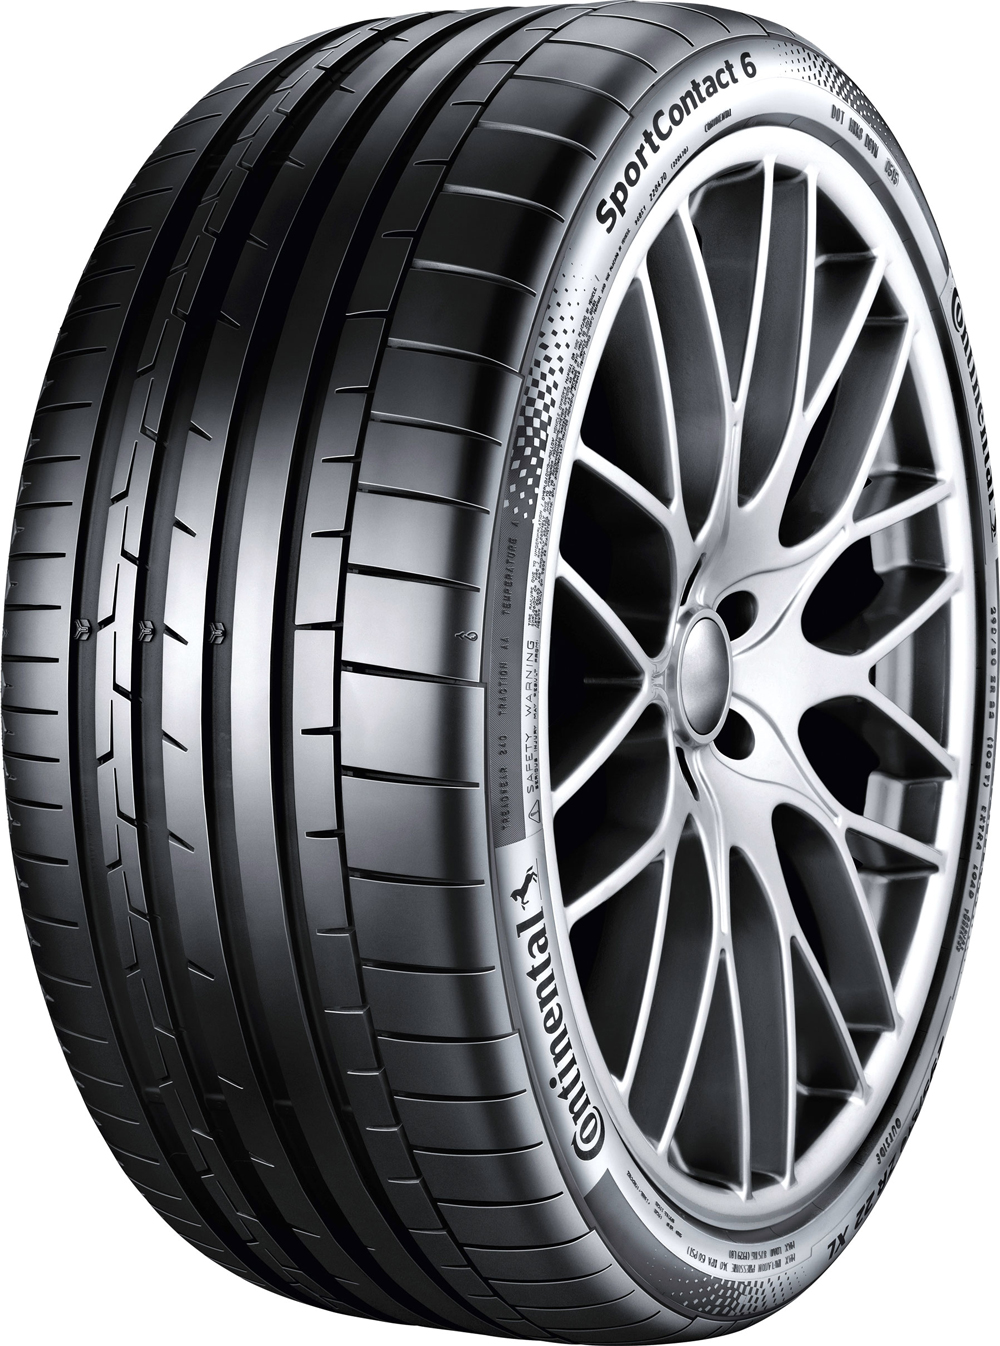 Автомобилни гуми CONTINENTAL SportContact 6 -S ContiSilent MERCEDES 315/40 R21 111Y